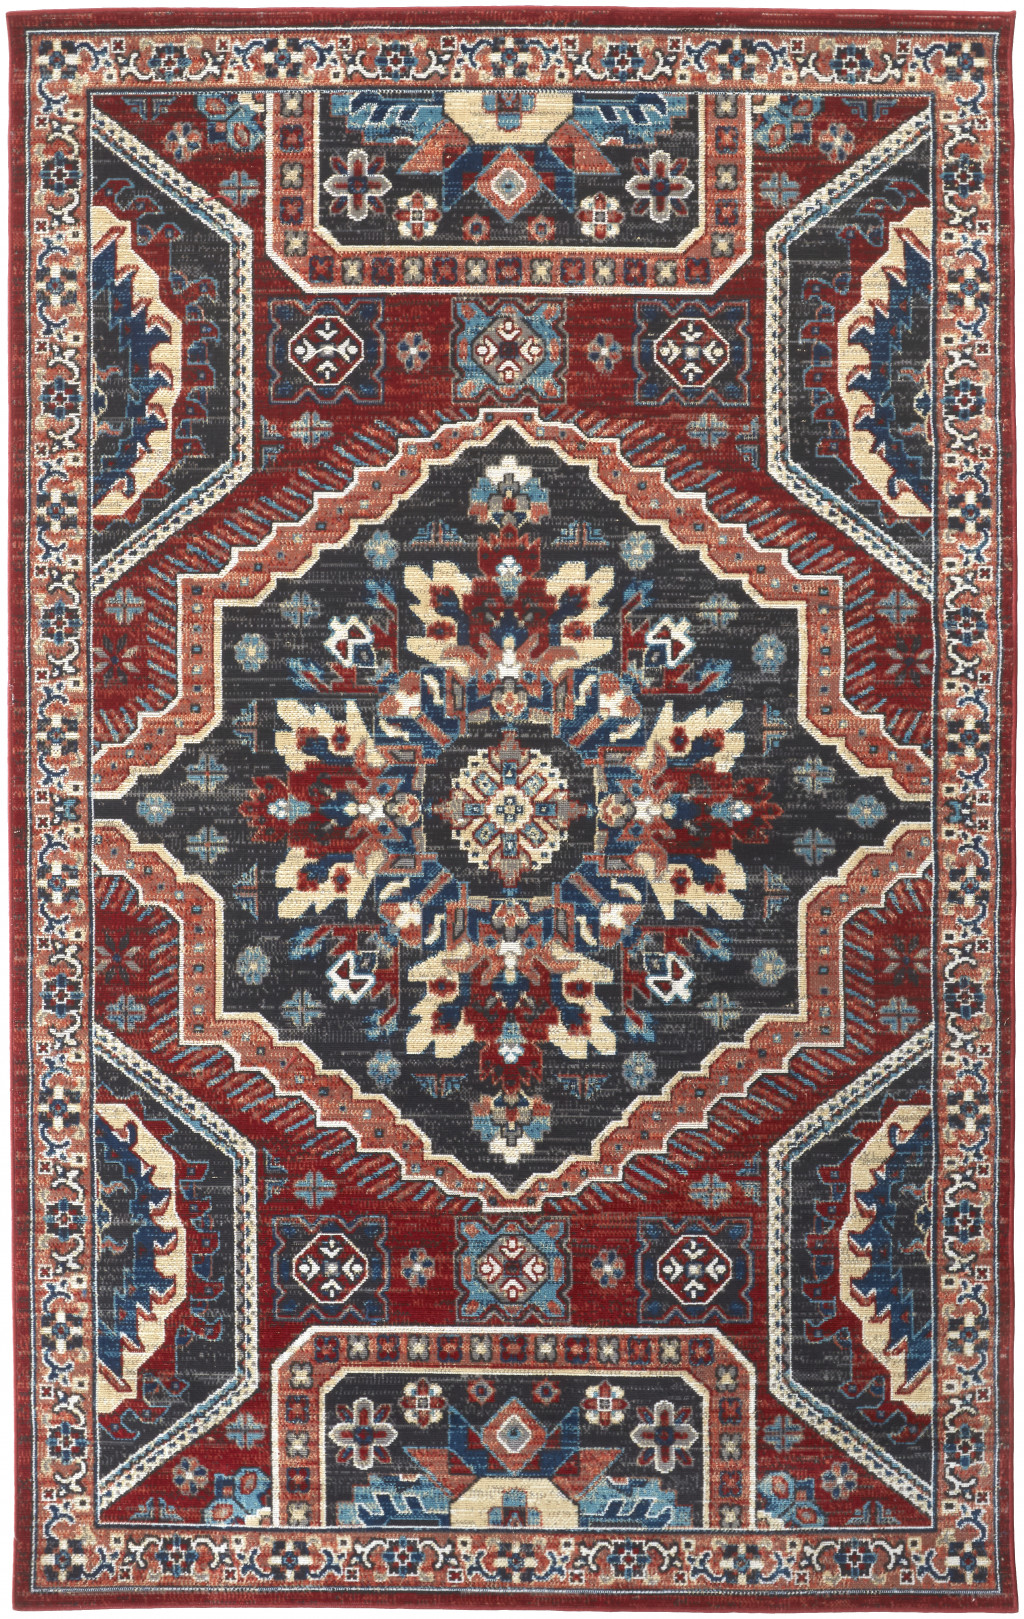 5' X 8' Red Gray And Tan Abstract Power Loom Distressed Stain Resistant Area Rug-514674-1